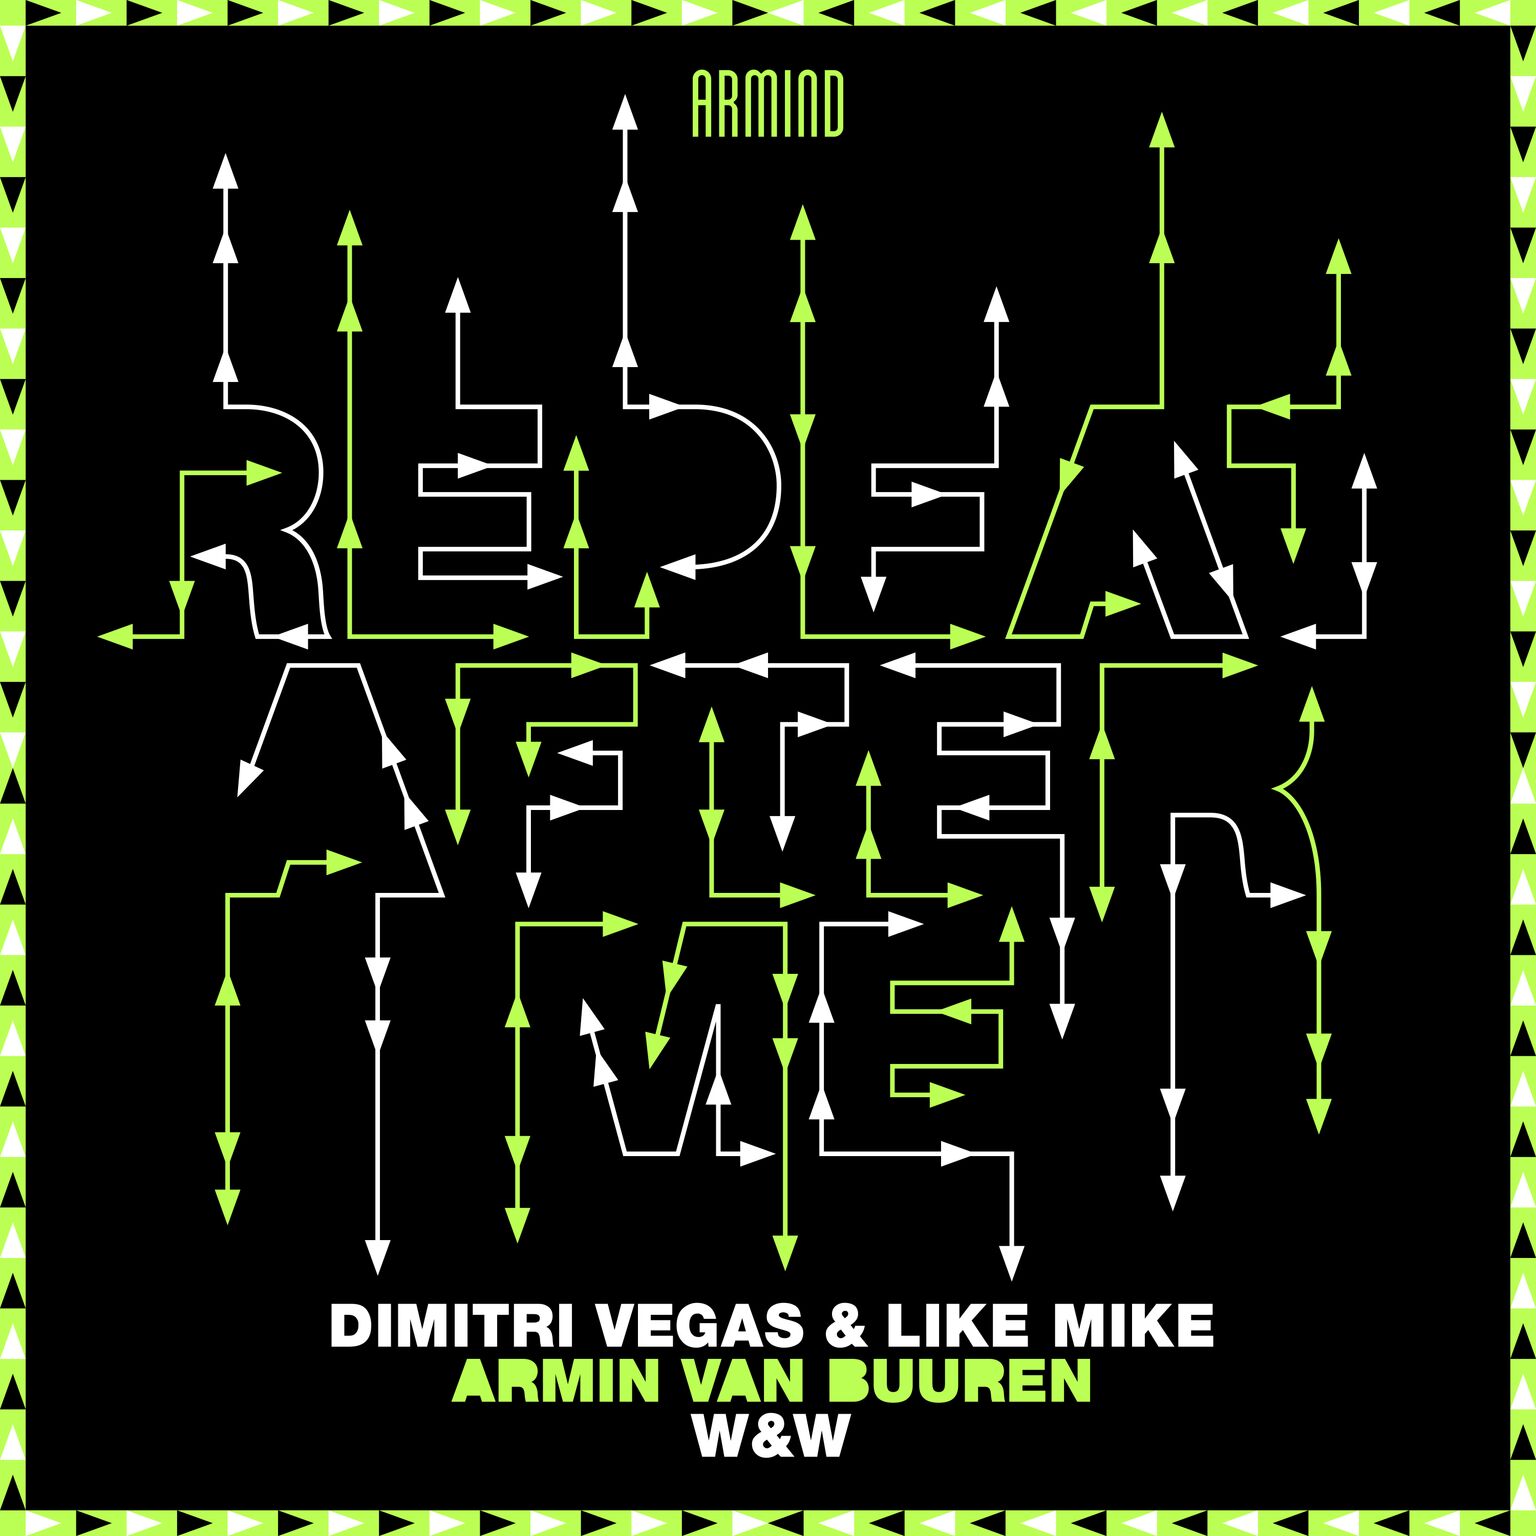 Dimitri Vegas and Like Mike, Armin van Buuren and W&W presents Repeat After Me on Armada Music